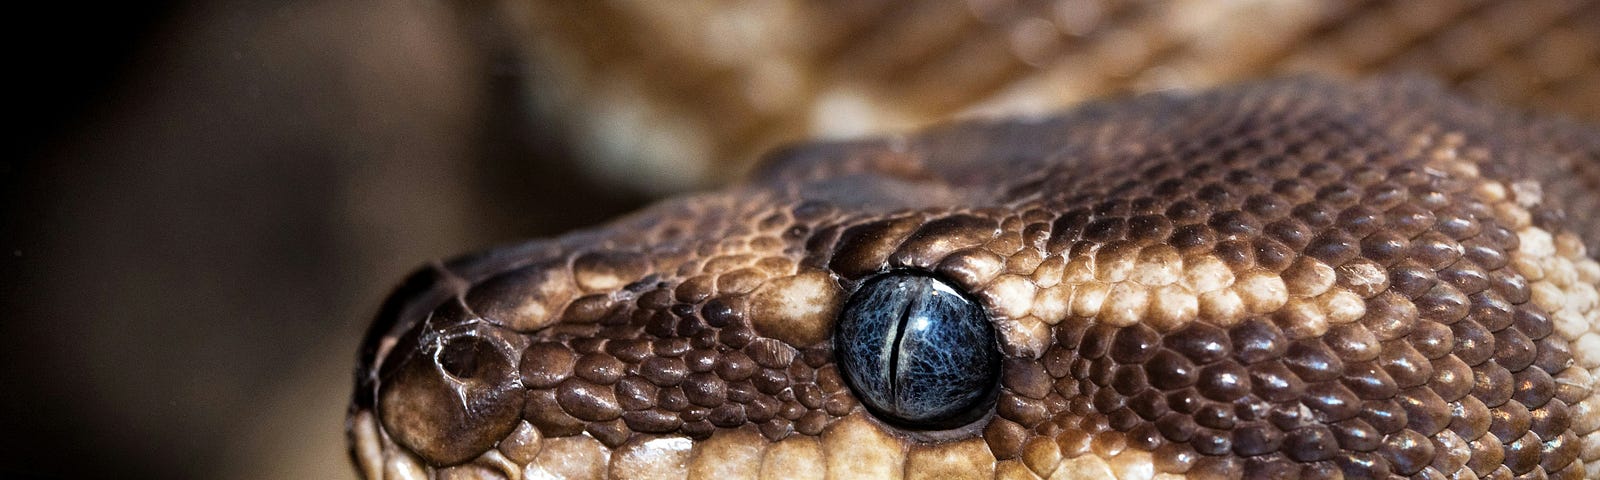 A photo of a dice snake